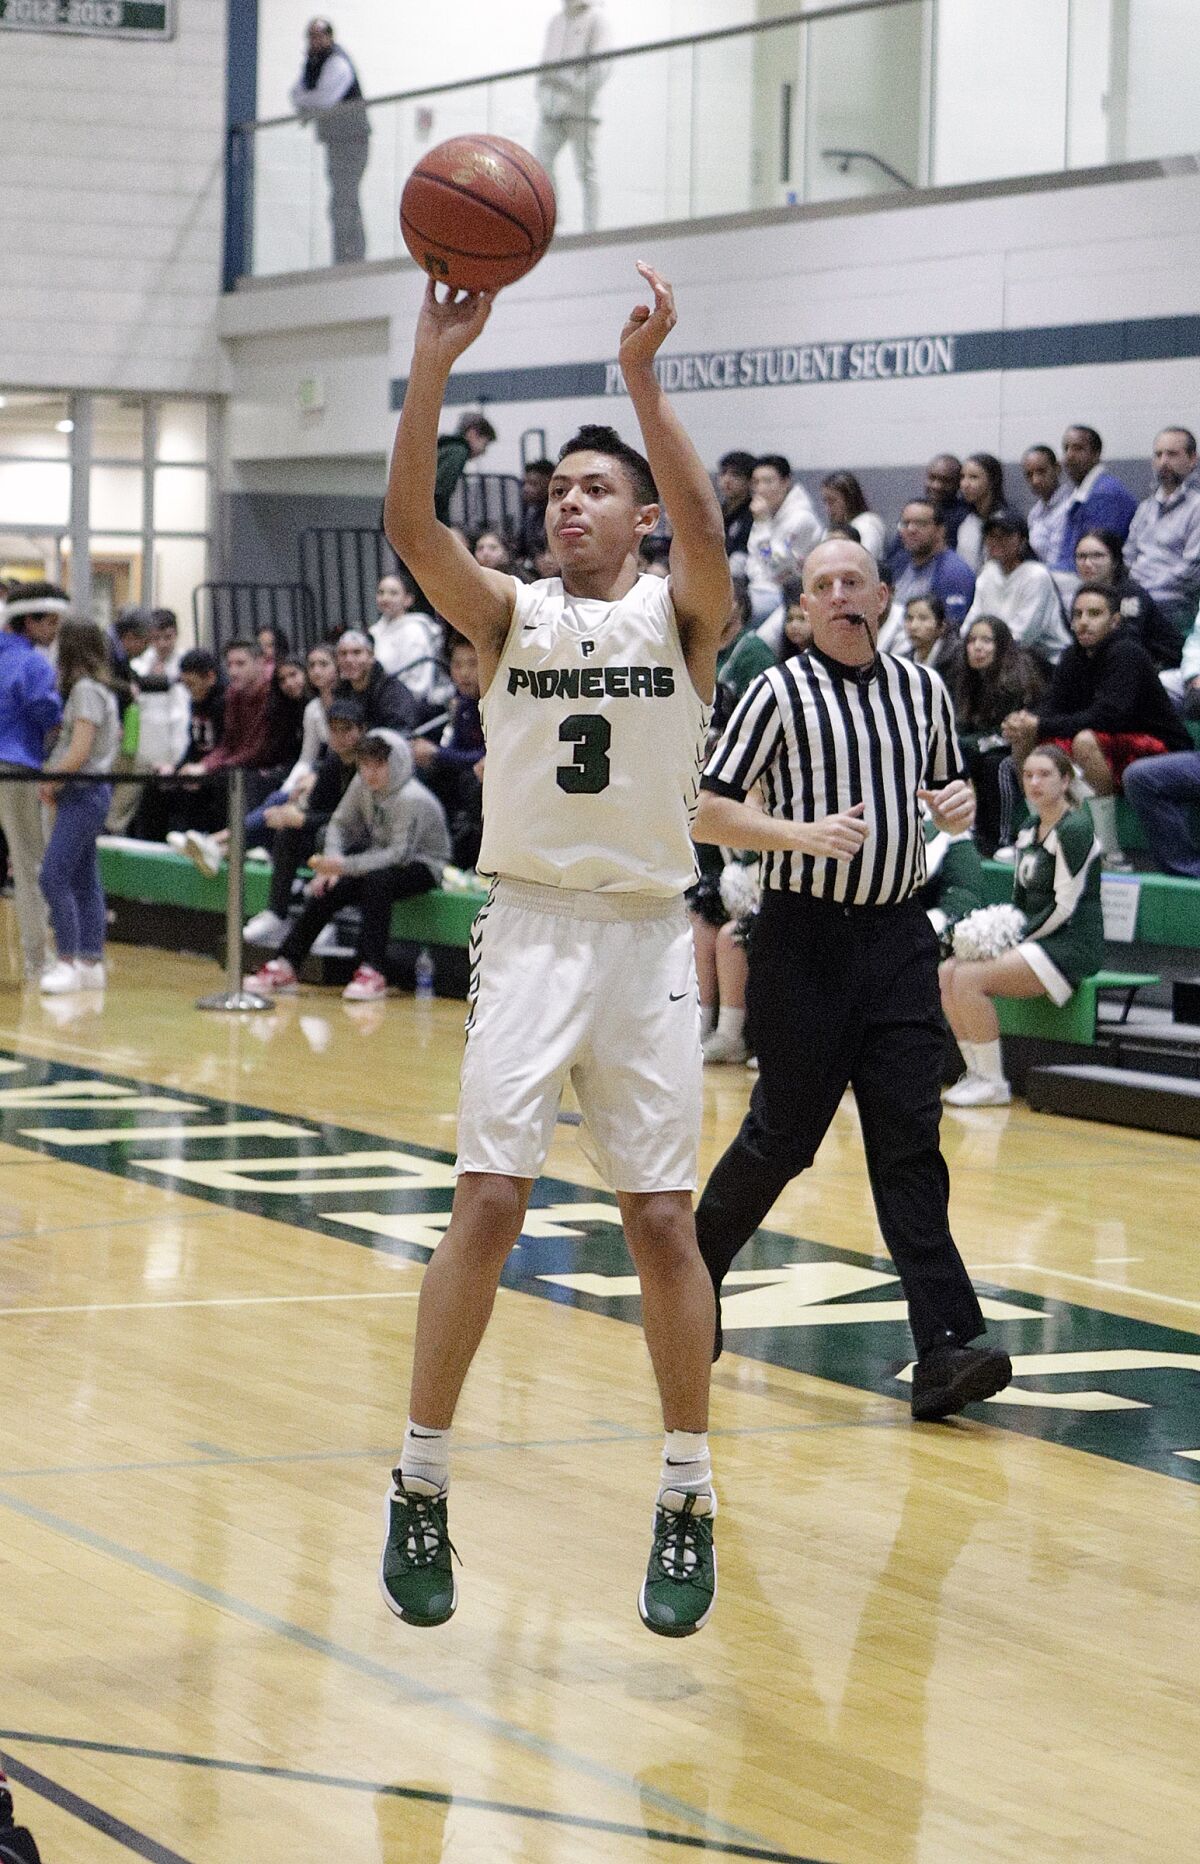 Providence High boys' basketball player Bryce Whitaker was named the Prep League's co-Most Valuable Player along with teammate A'Jhani Levias.